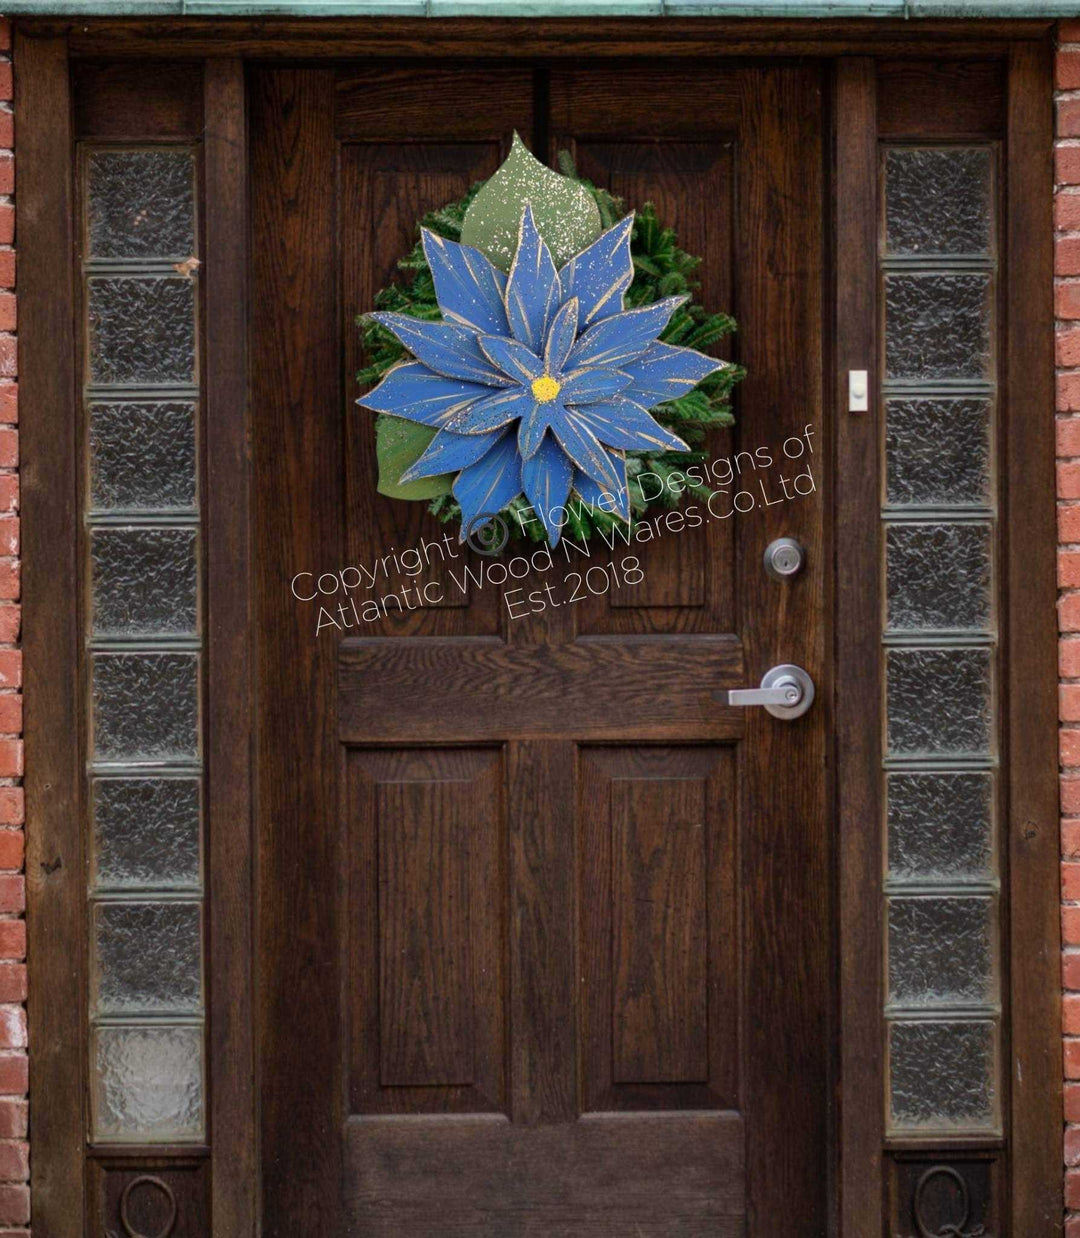 Atlantic Wood N Wares Home & Garden>Home Décor>Wall Decor>Wall Hangings 14.5"×14.5" / Blue The Poinsettia:A Beautiful and Unique Way to Celebrate the Holiday Season